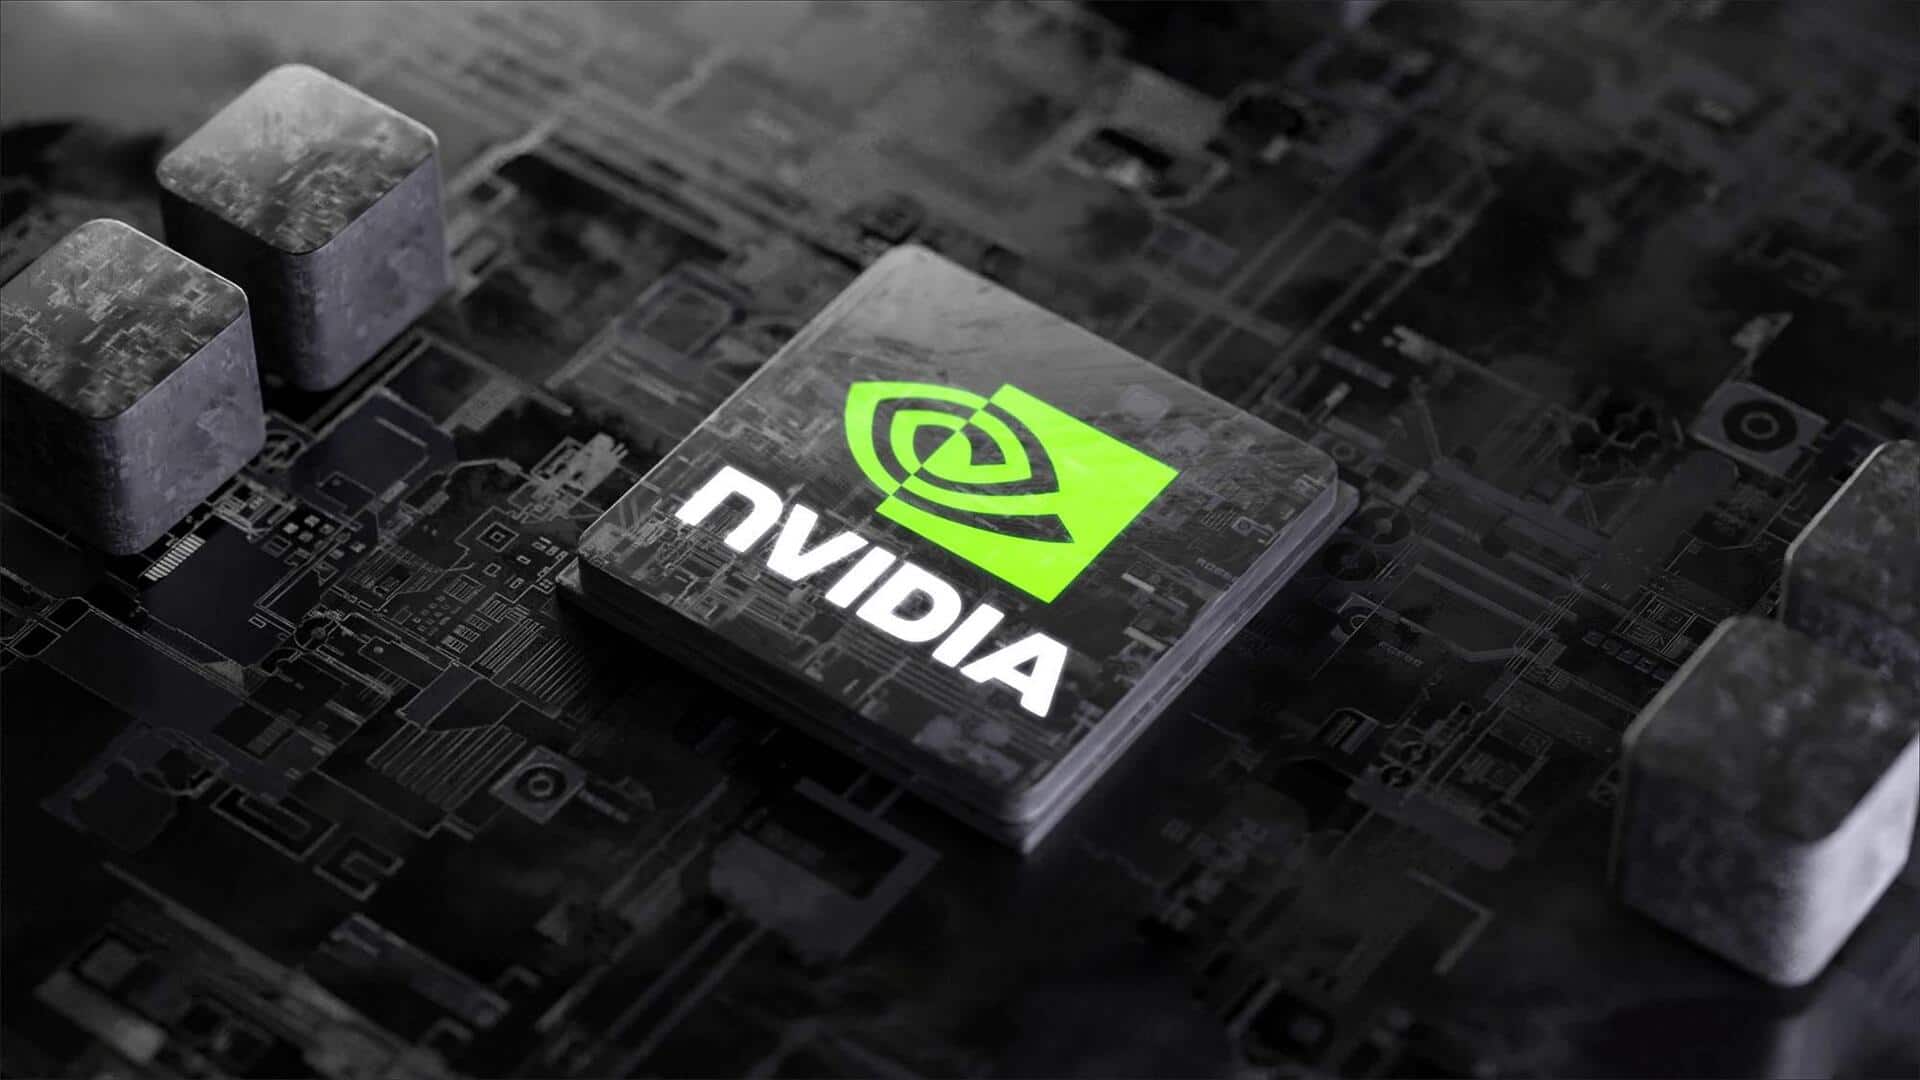 NVIDIA may introduce its own handheld gaming PC: Report